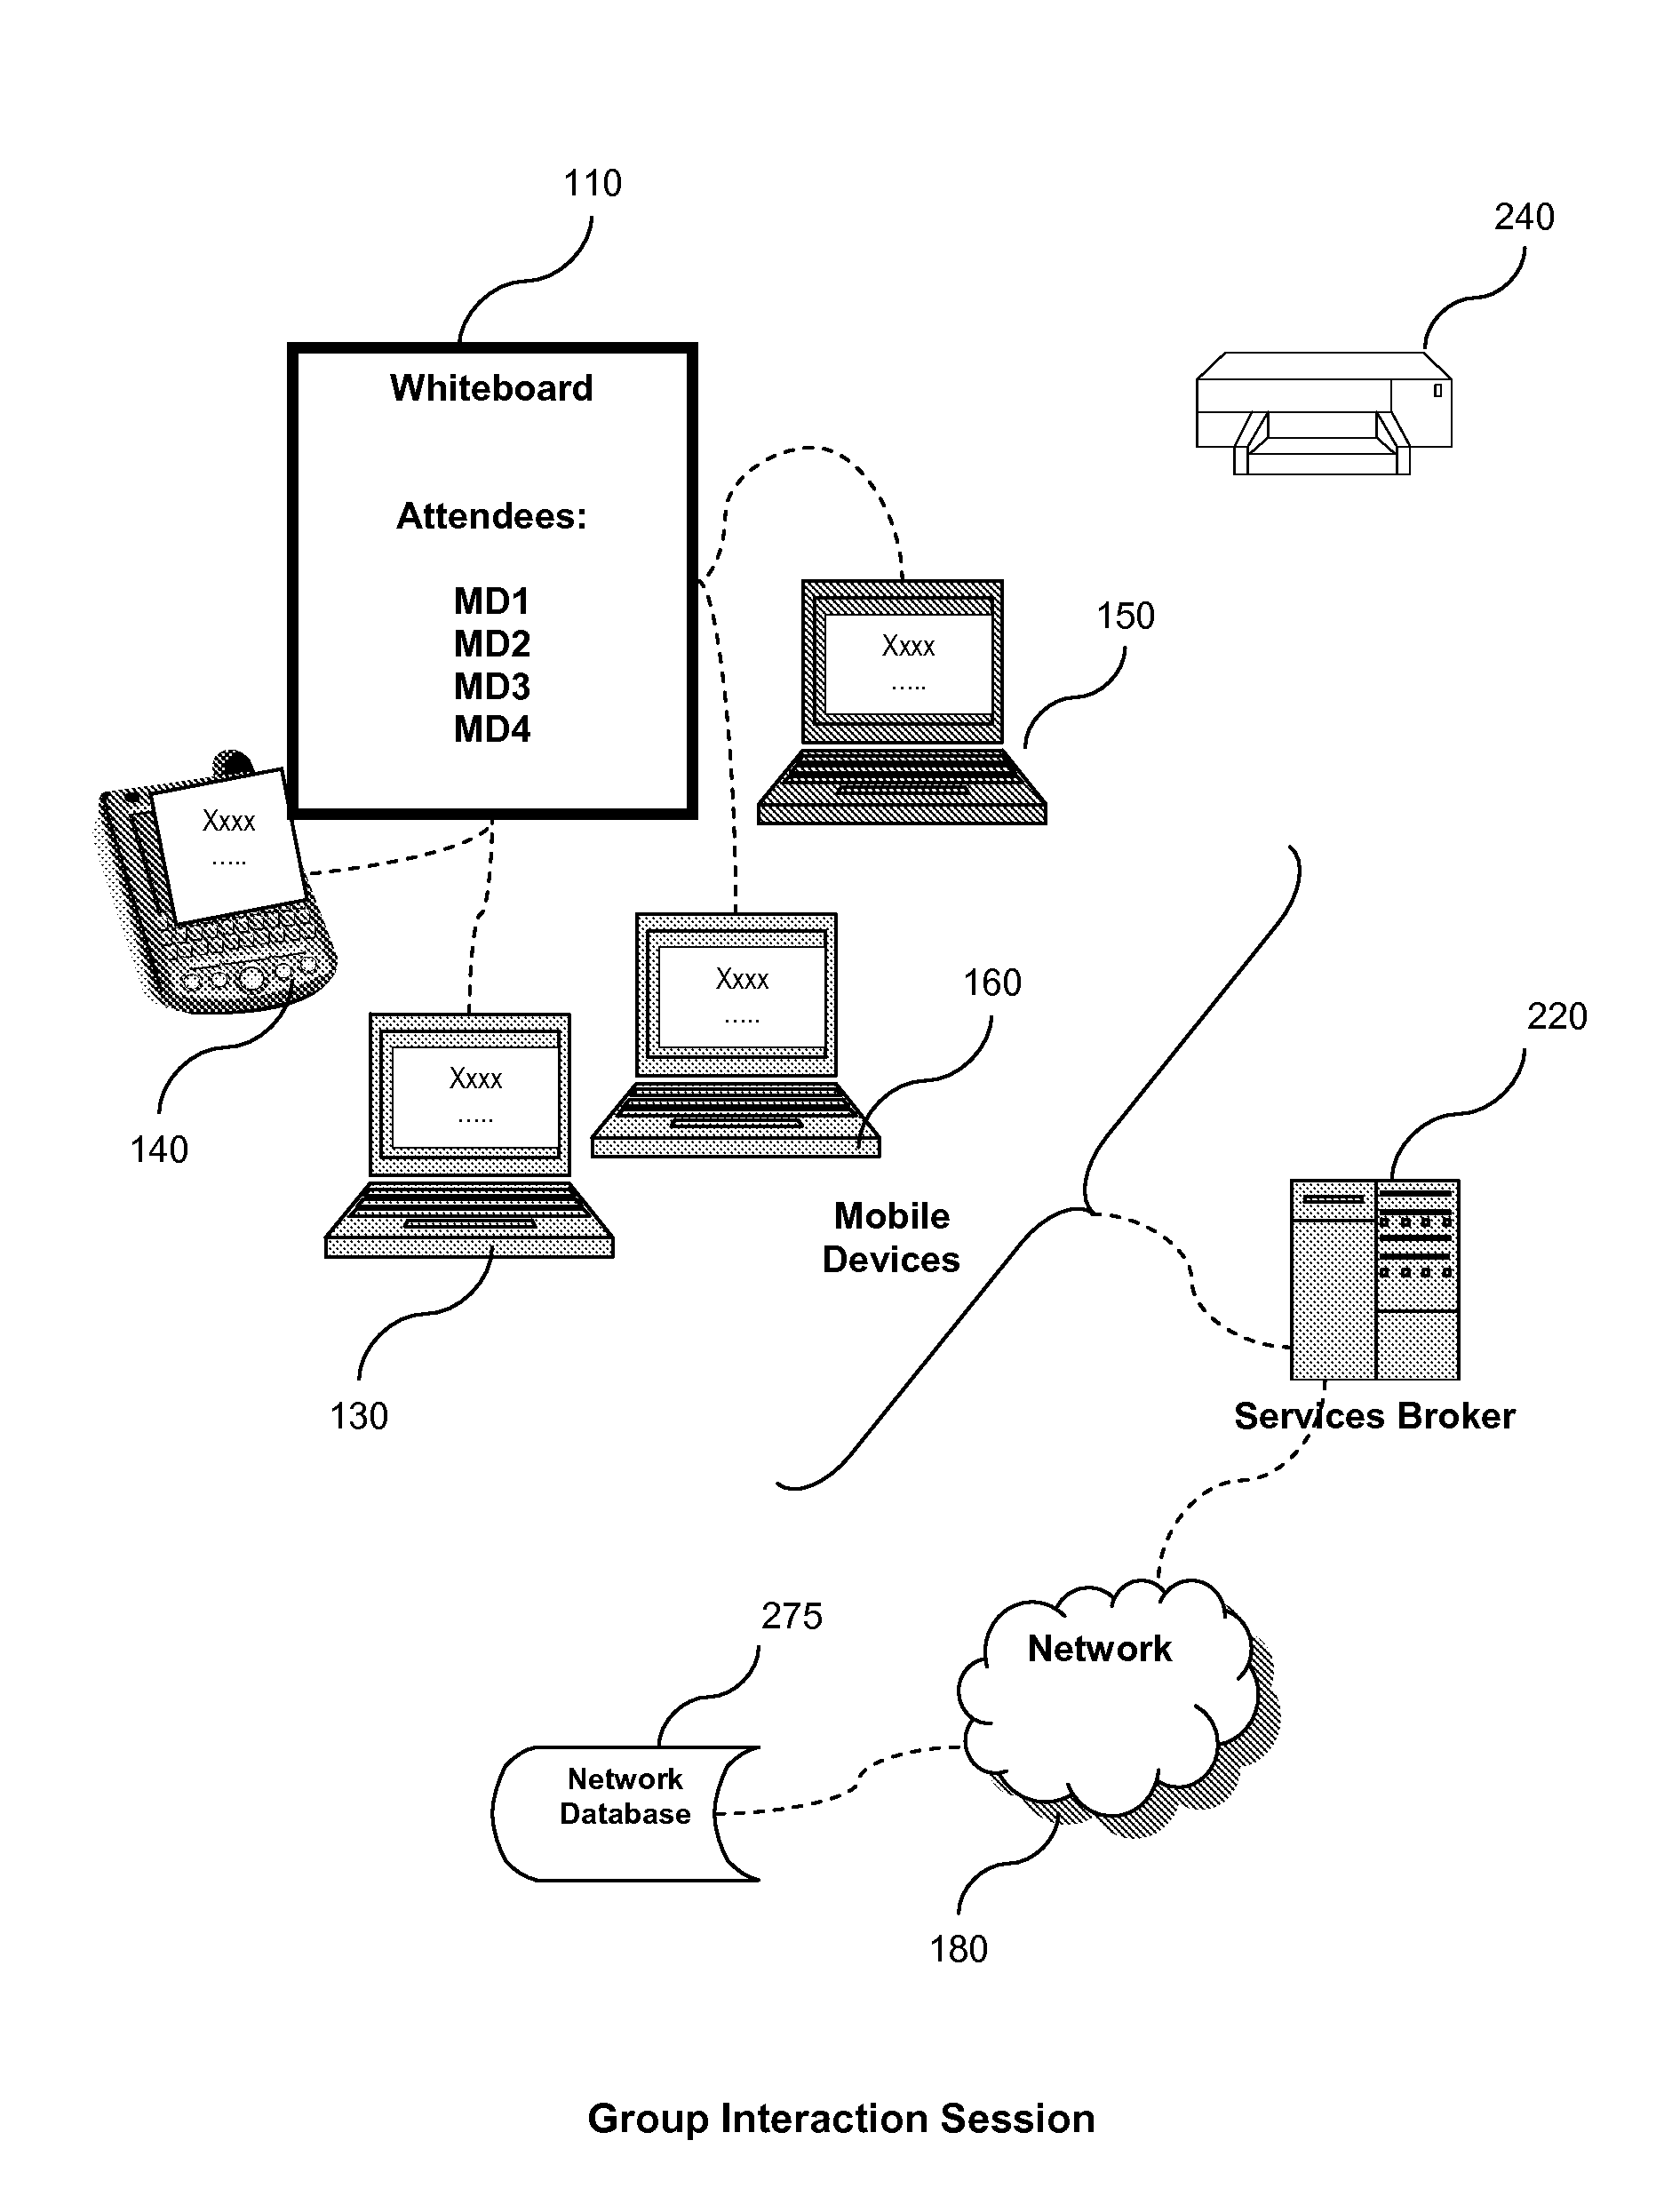 System and method for managing group interaction session states